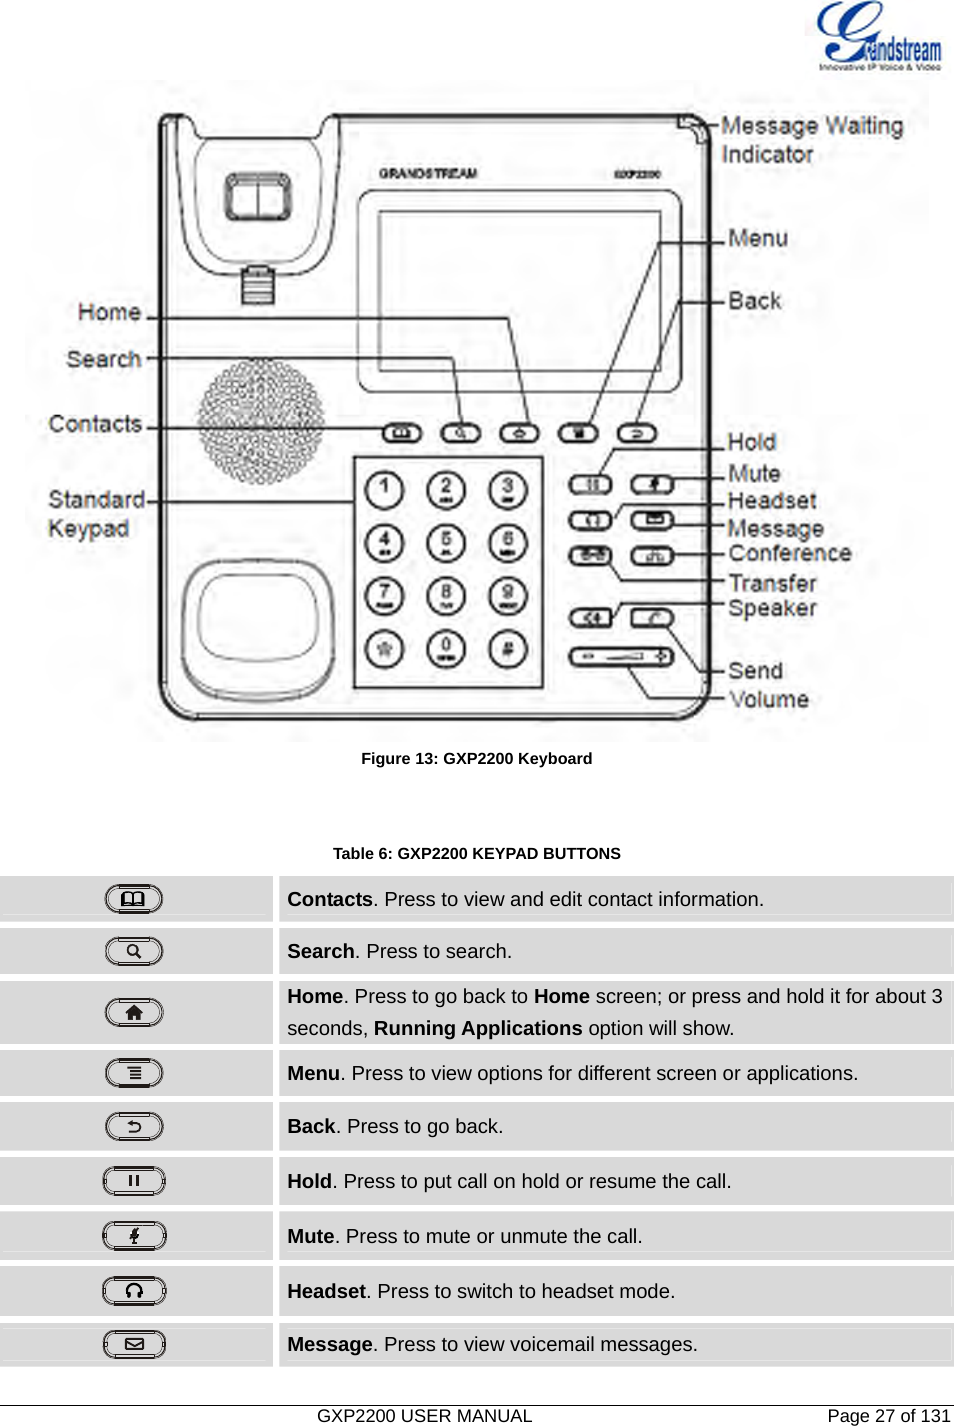   GXP2200 USER MANUAL       Page 27 of 131                                   Figure 13: GXP2200 Keyboard   Table 6: GXP2200 KEYPAD BUTTONS  Contacts. Press to view and edit contact information.  Search. Press to search.  Home. Press to go back to Home screen; or press and hold it for about 3 seconds, Running Applications option will show.  Menu. Press to view options for different screen or applications.  Back. Press to go back.  Hold. Press to put call on hold or resume the call.  Mute. Press to mute or unmute the call.  Headset. Press to switch to headset mode.  Message. Press to view voicemail messages. 